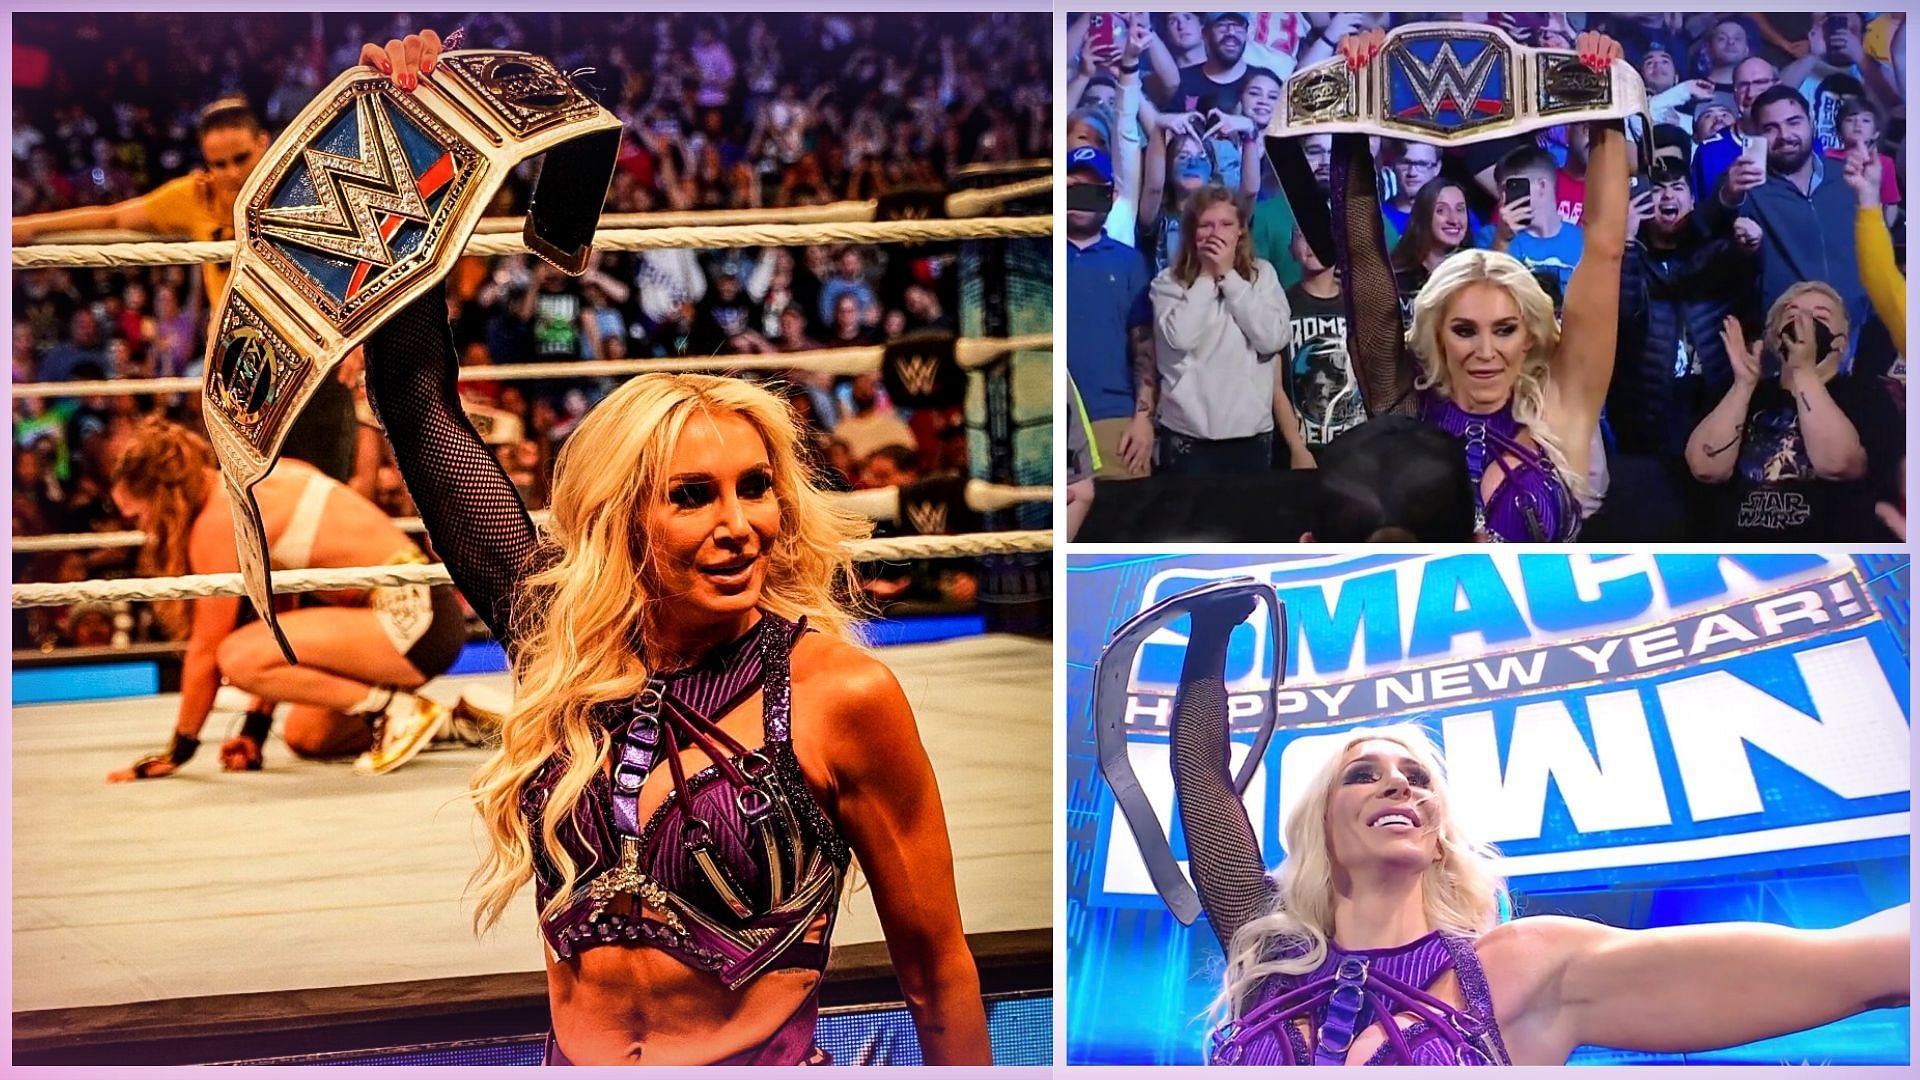 Charlotte Flair made her surprise return to WWE SmackDown